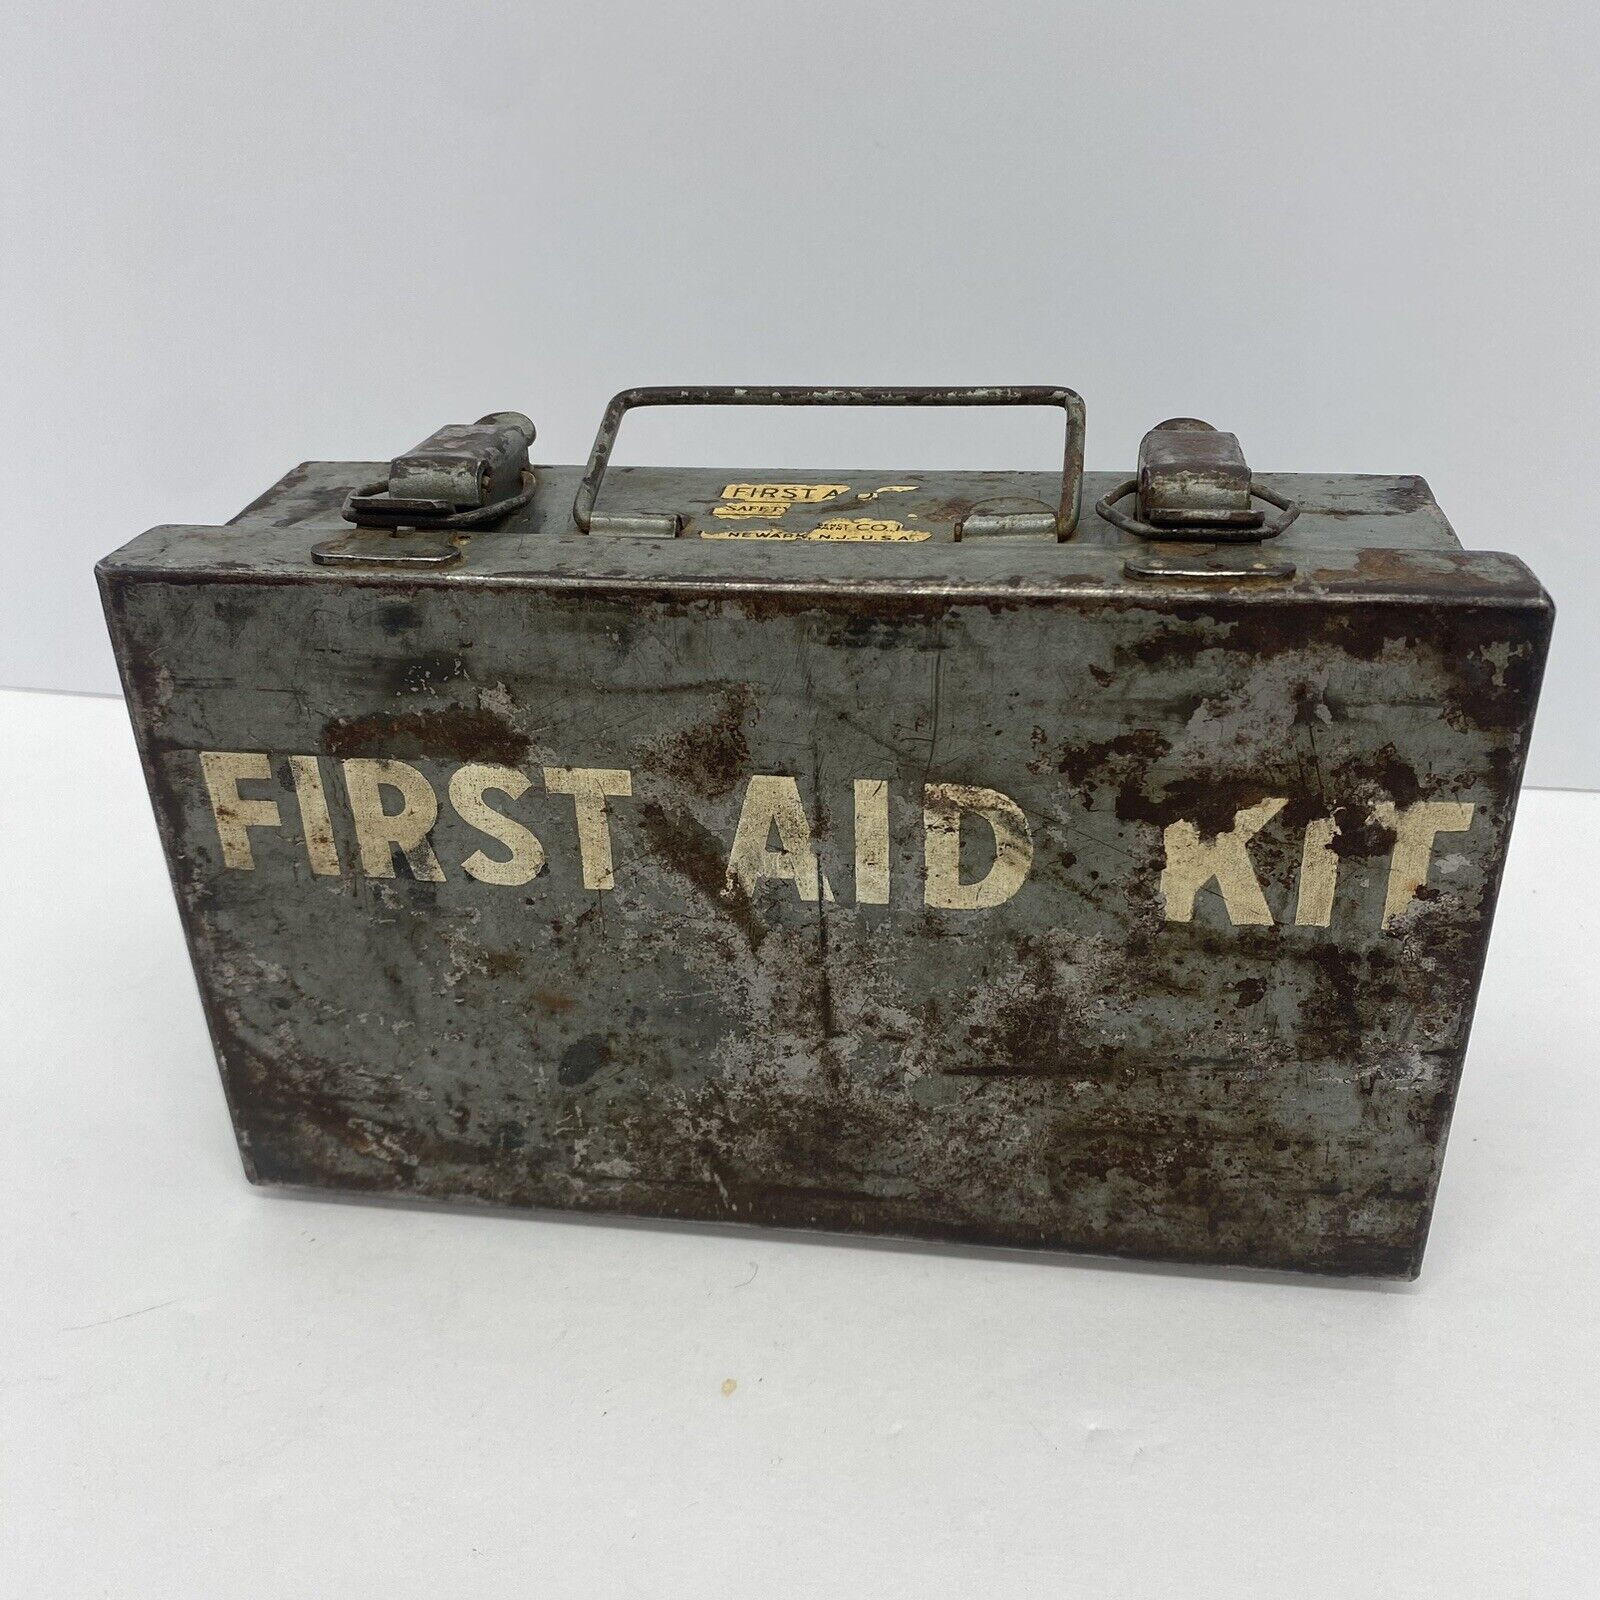 Vintage Army Metal First Aid Kit Davis Co Medical Supply Company & Contents Prop